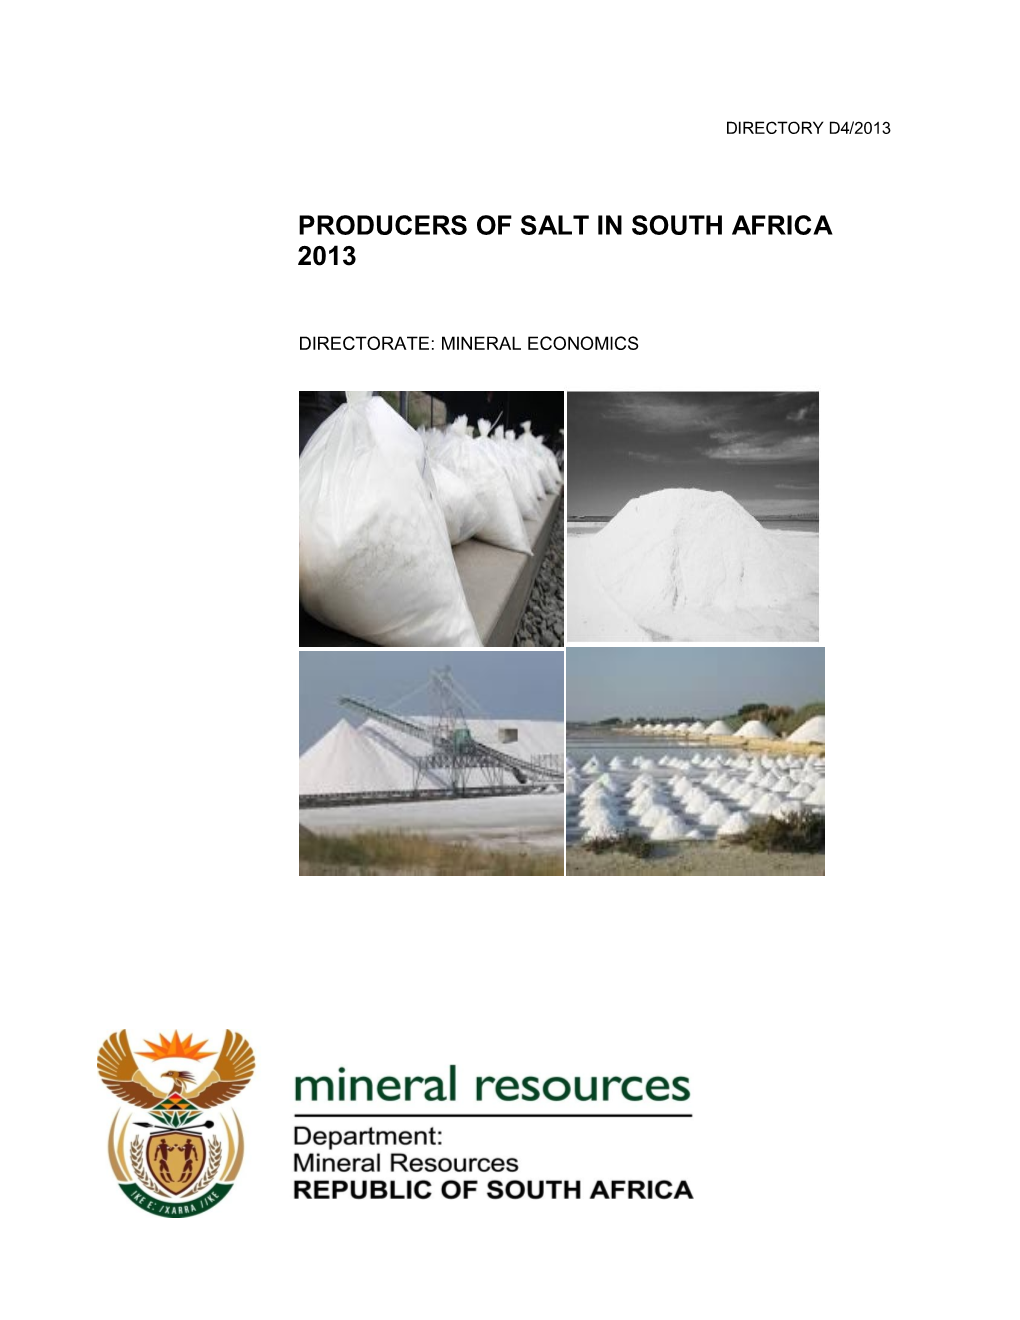 Producers of Salt in South Africa 2013